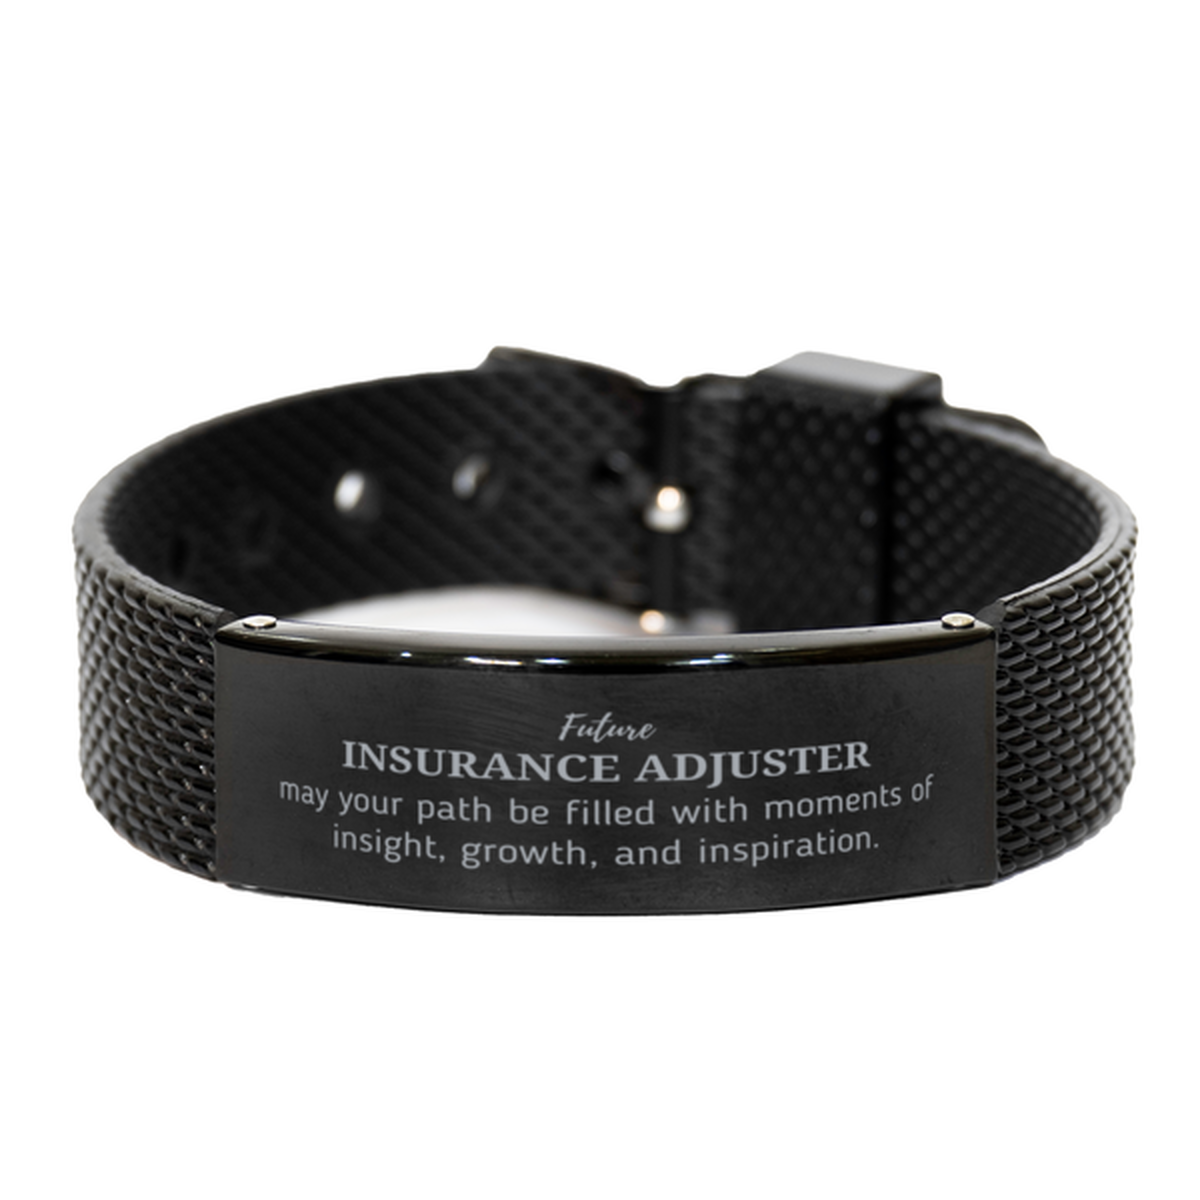 Future Insurance Adjuster Gifts, May your path be filled with moments of insight, Graduation Gifts for New Insurance Adjuster, Christmas Unique Black Shark Mesh Bracelet For Men, Women, Friends